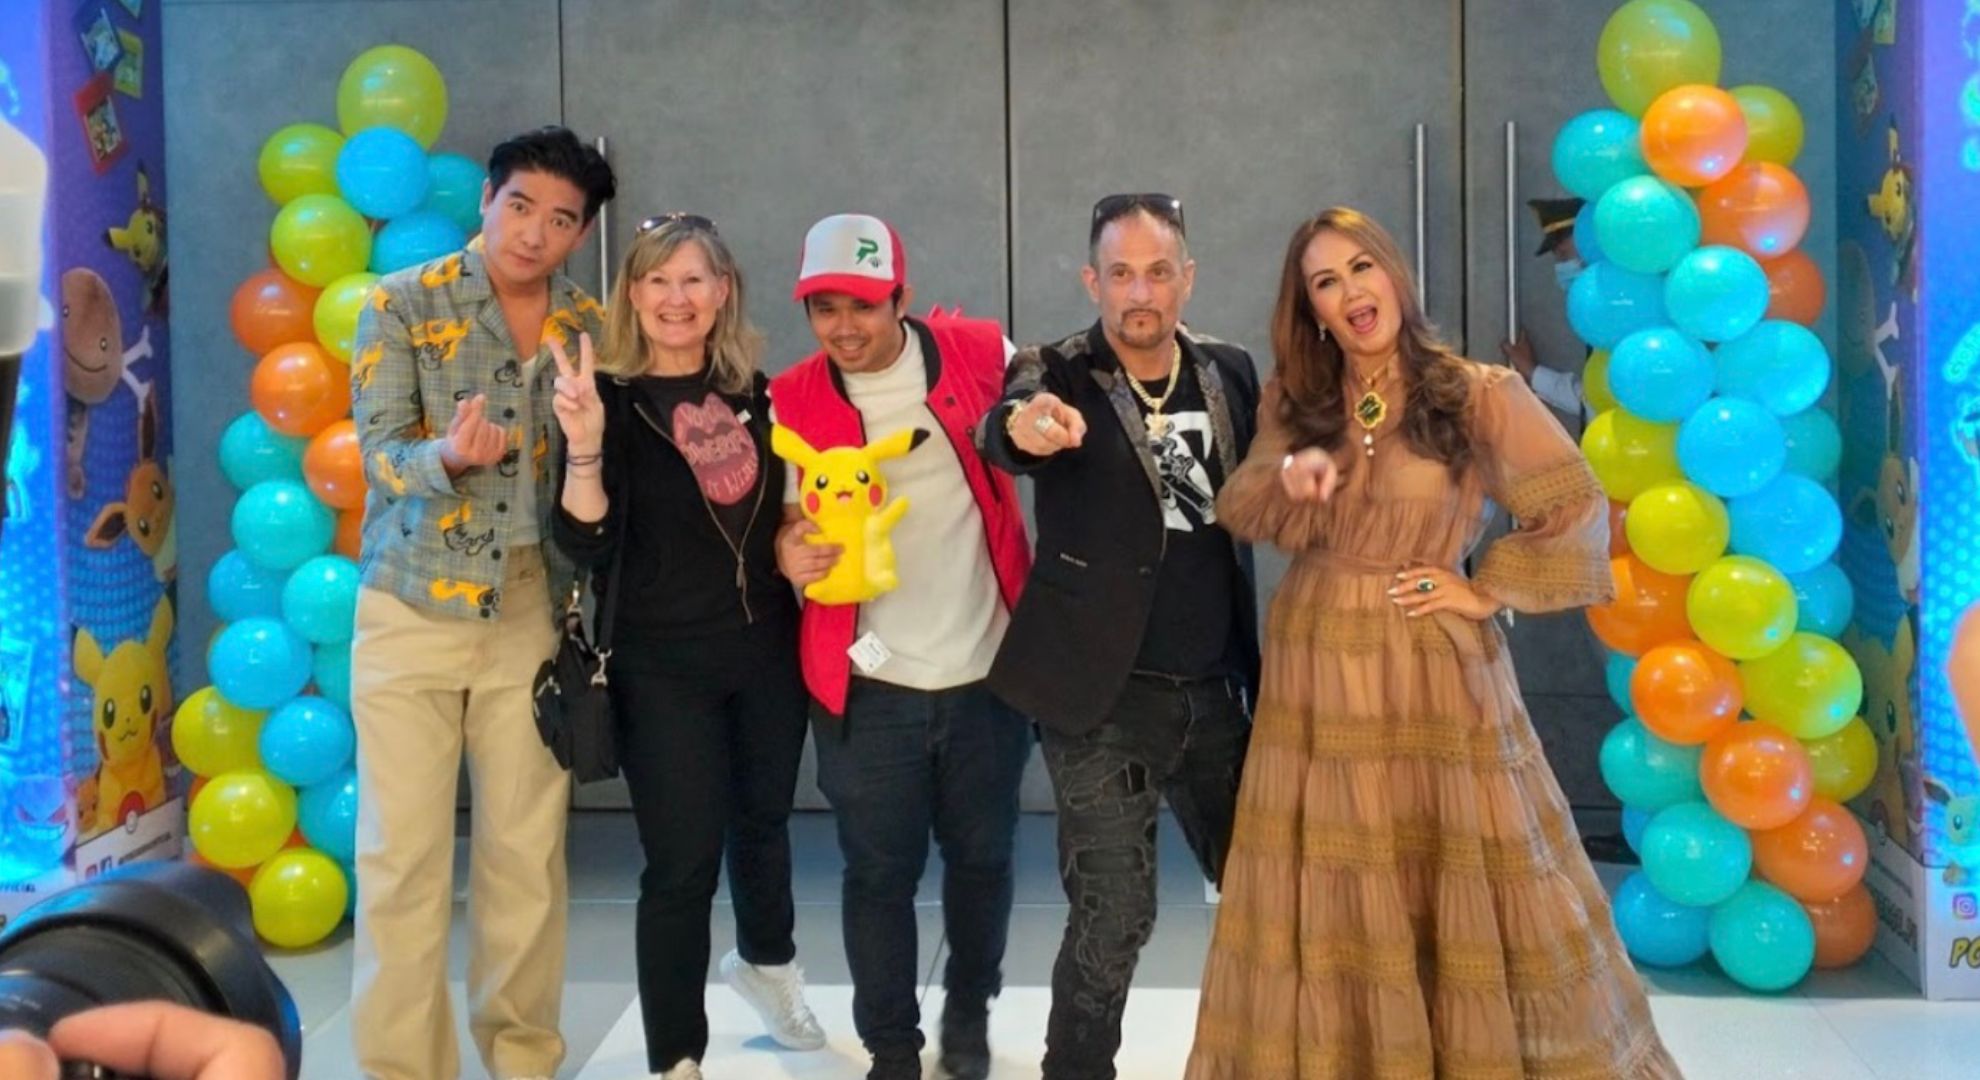 Pokémon magic comes alive at Pokeverse Expo with Veronica Taylor and ...